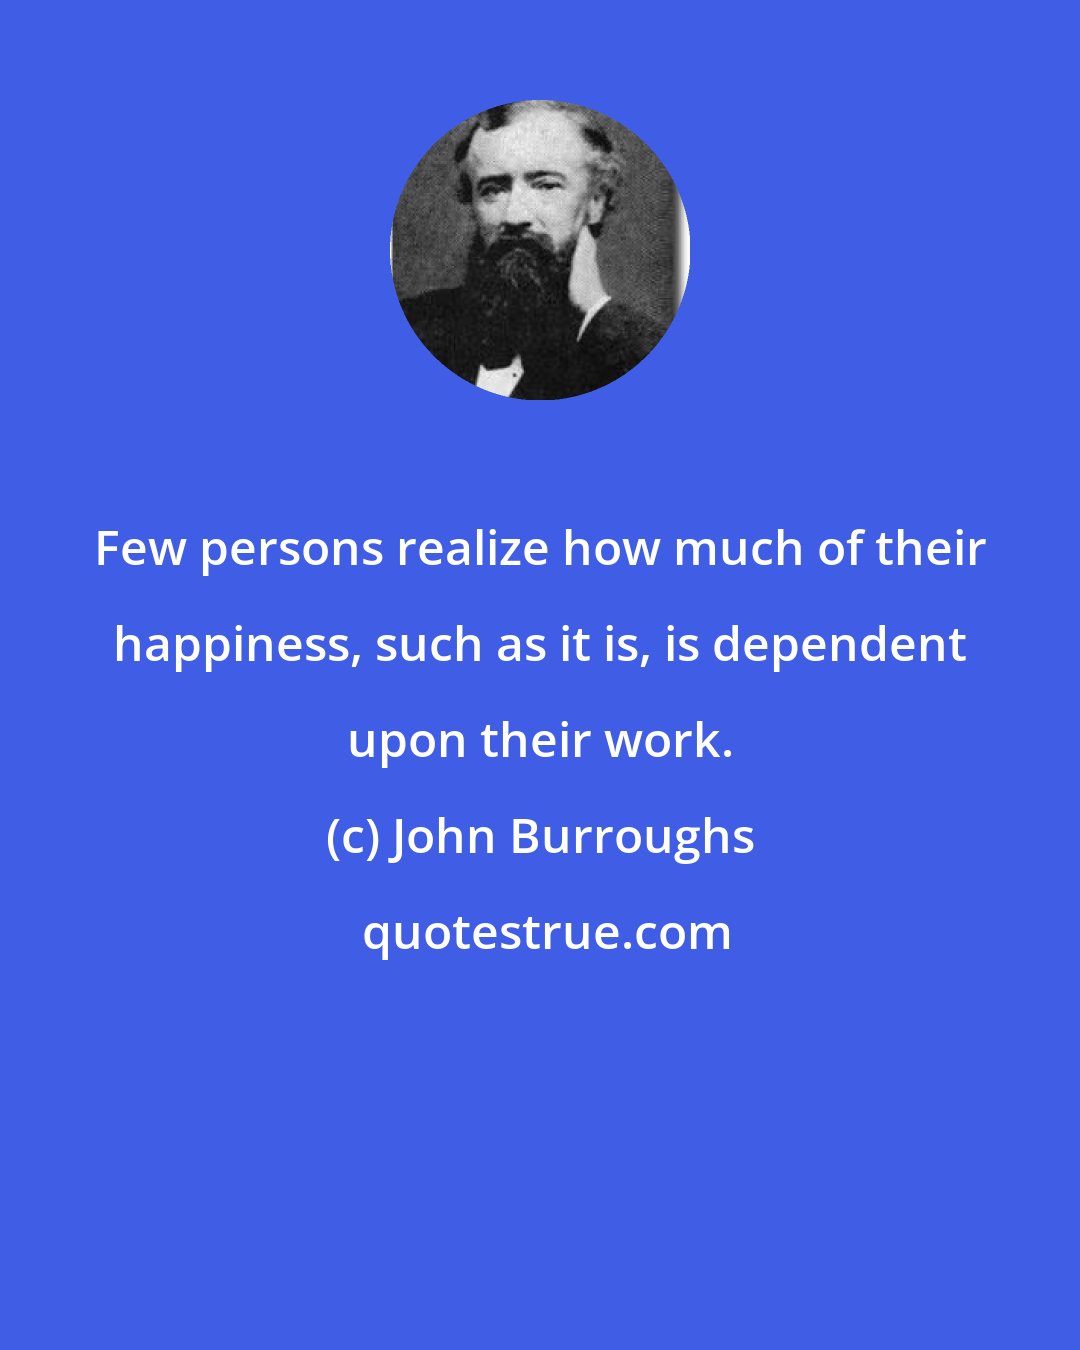 John Burroughs: Few persons realize how much of their happiness, such as it is, is dependent upon their work.